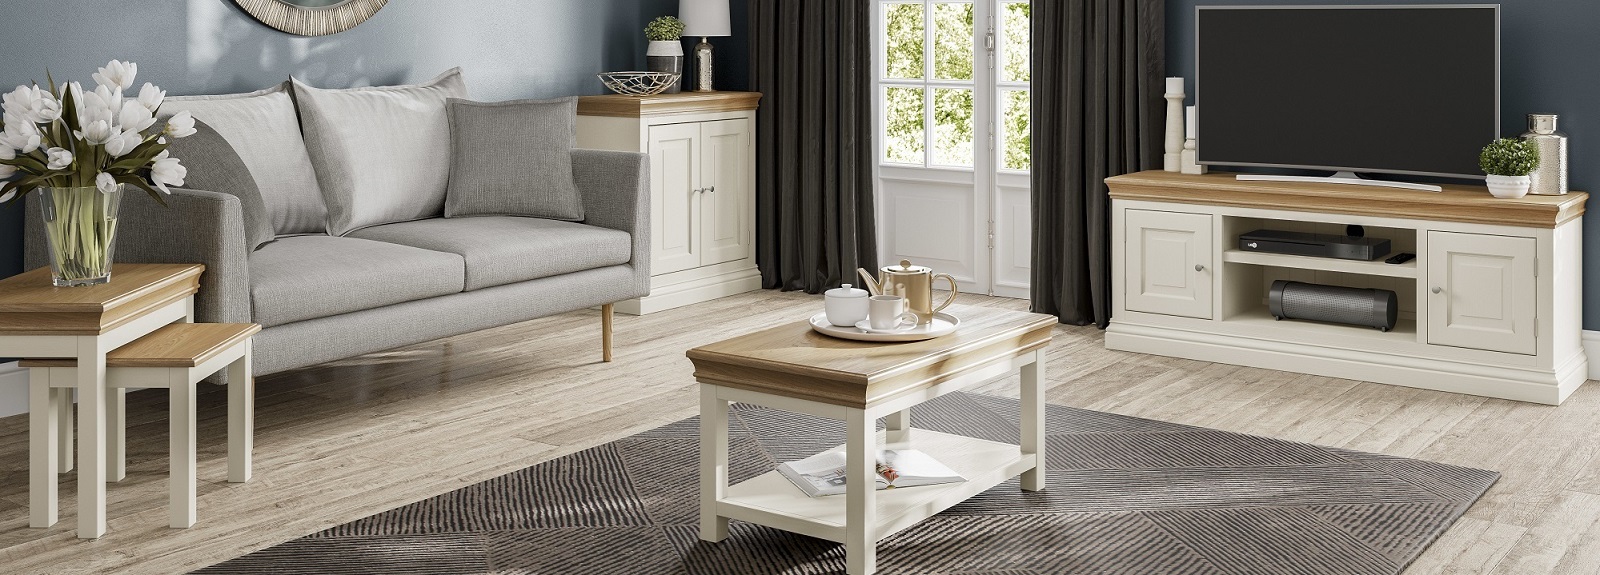 Country Cottage-Style Furniture in UK Nationwide